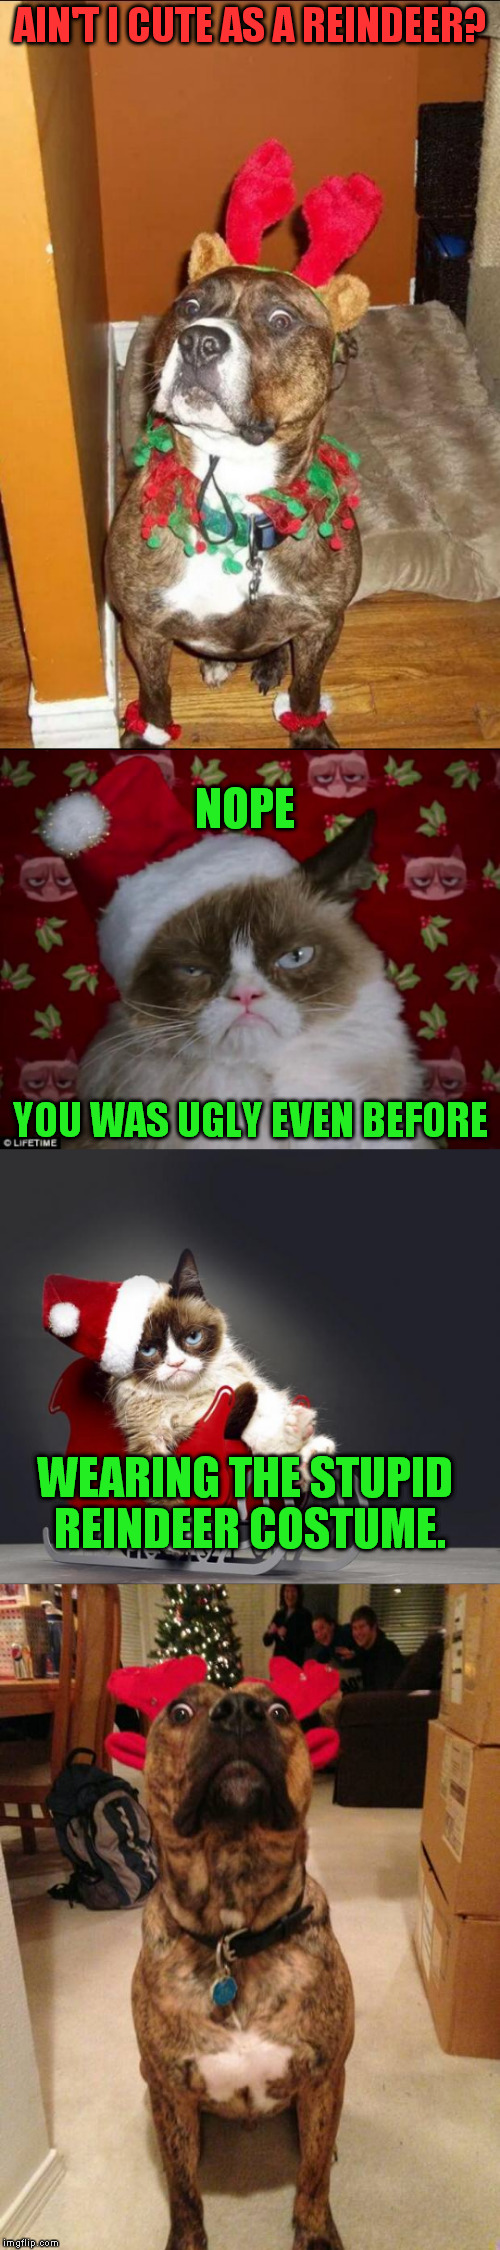 reindeer dog vs grumpy cat | AIN'T I CUTE AS A REINDEER? NOPE; YOU WAS UGLY EVEN BEFORE; WEARING THE STUPID REINDEER COSTUME. | image tagged in grumpy cat,dog,reindeer,costume,what | made w/ Imgflip meme maker